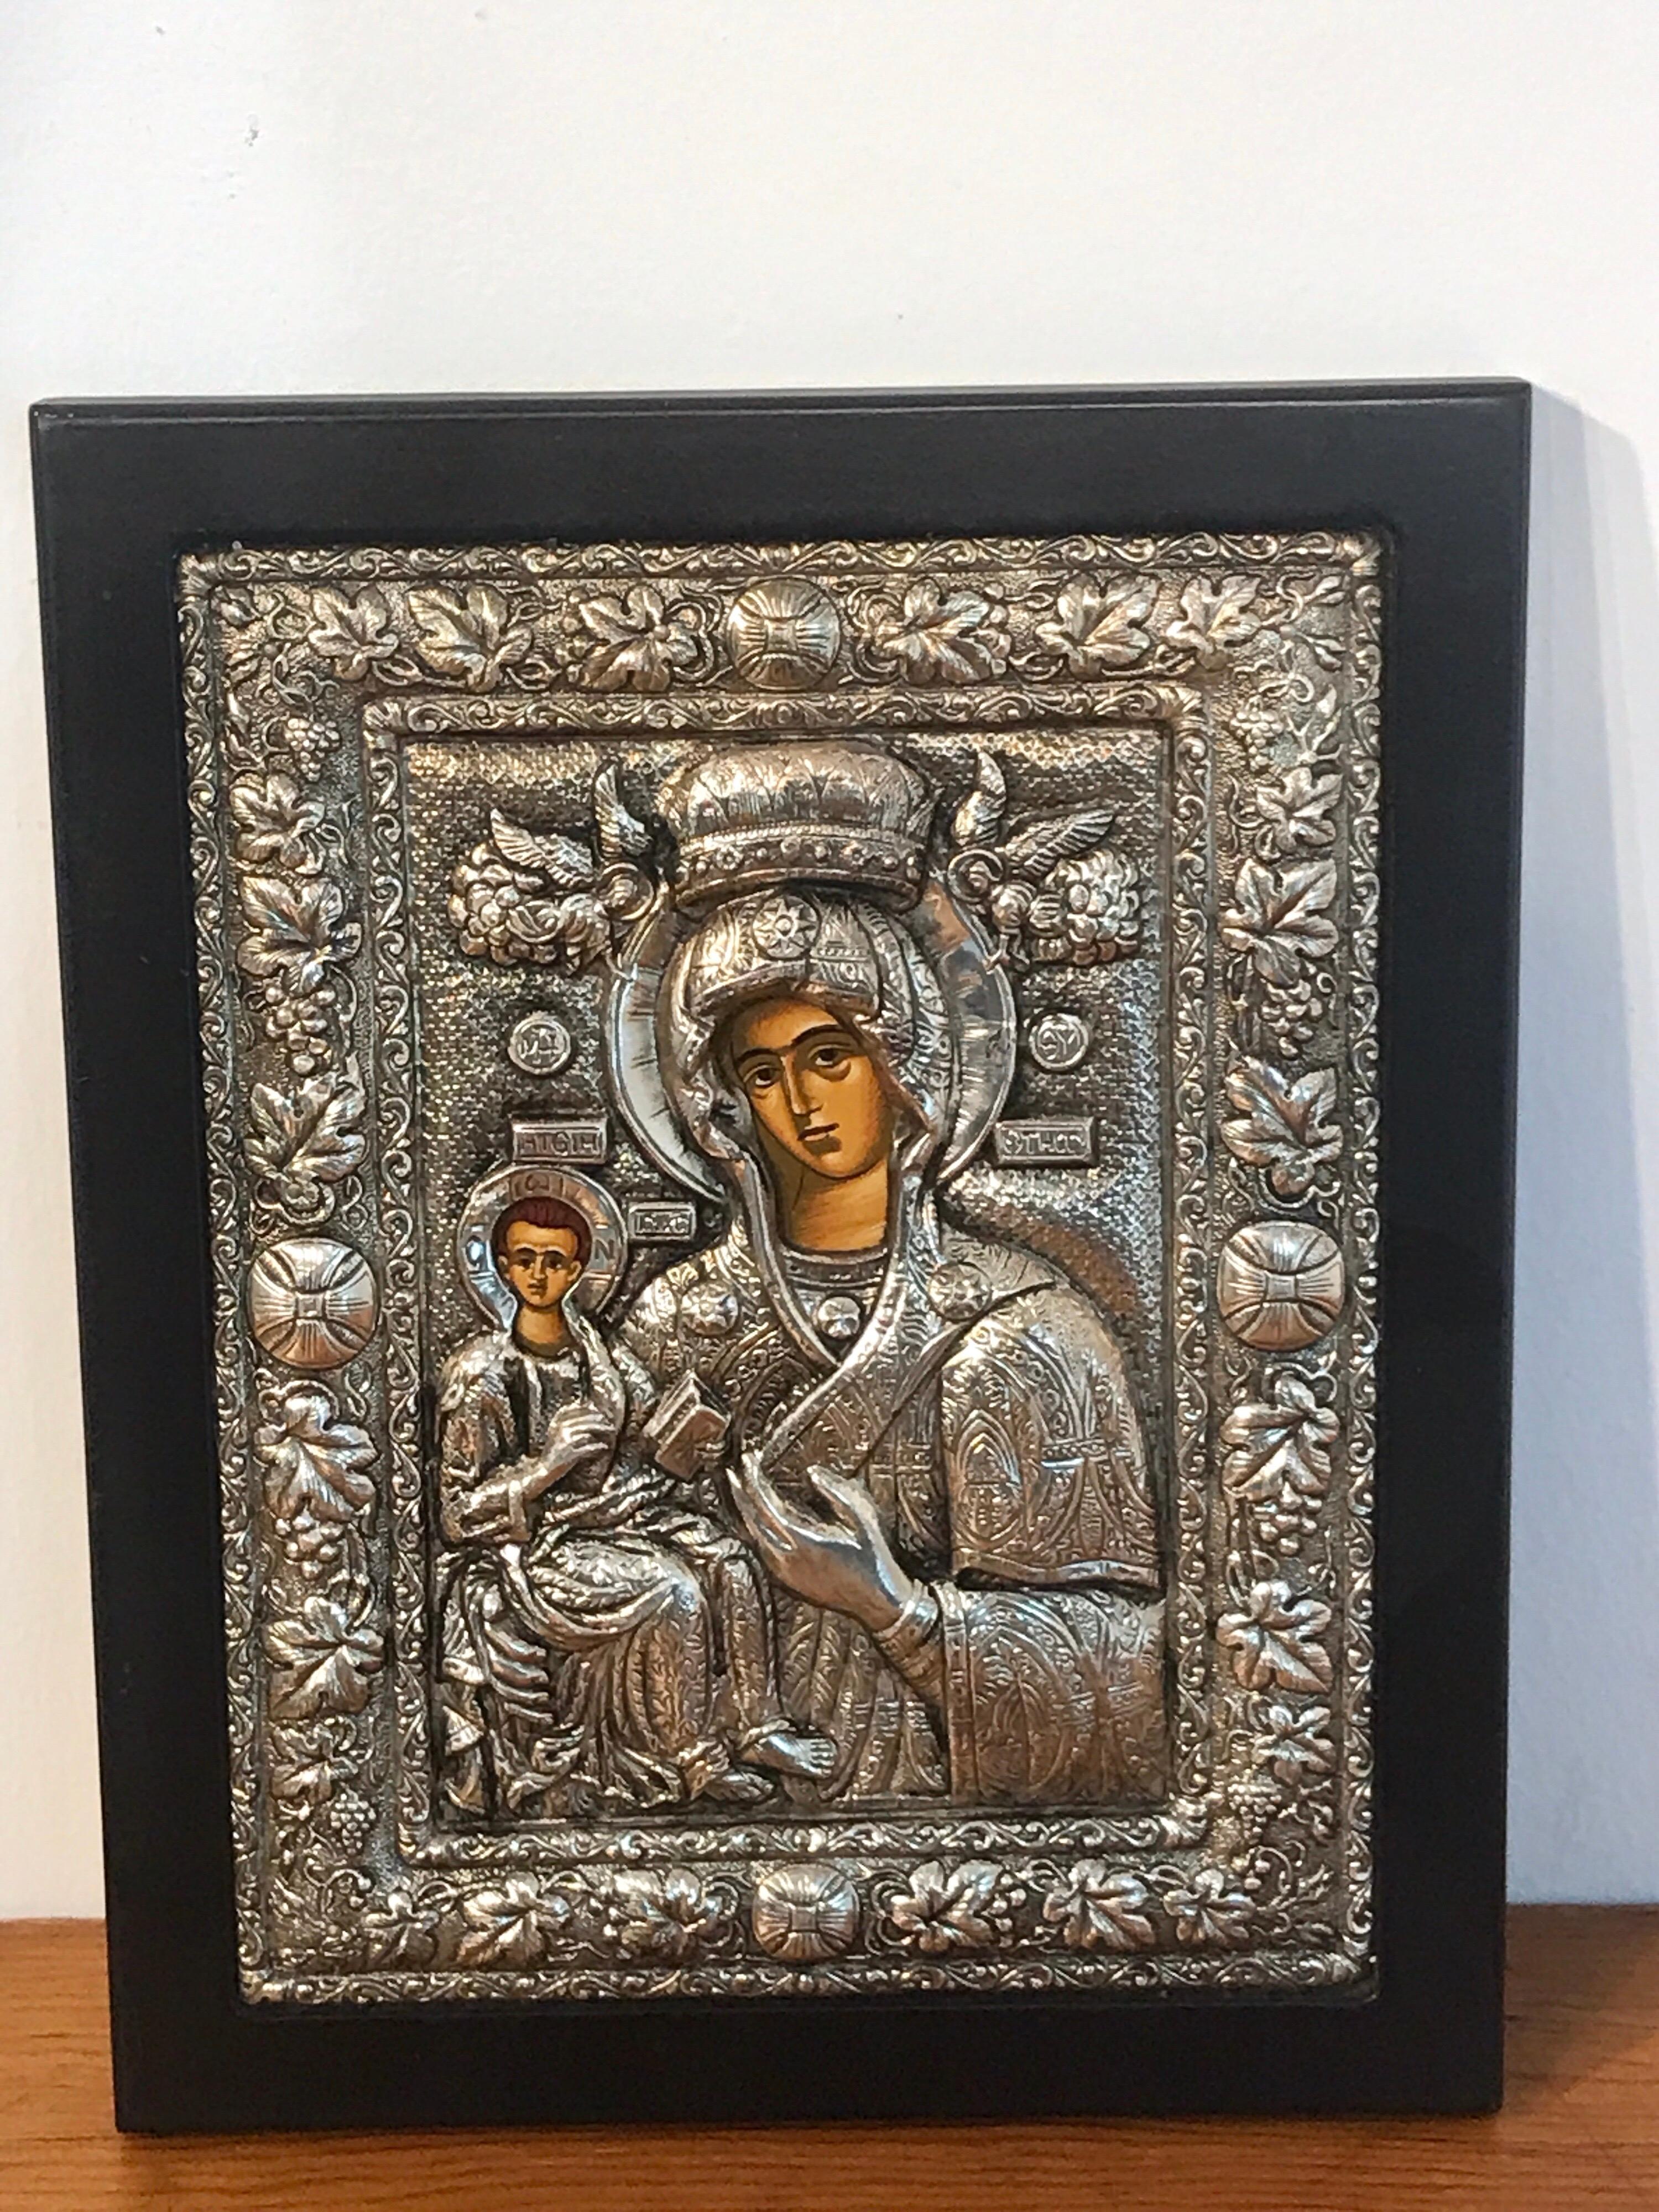 Russian silver Riza icon of Madonna and child, with finely repoused riza, hand painted portraits. The icon measures 7